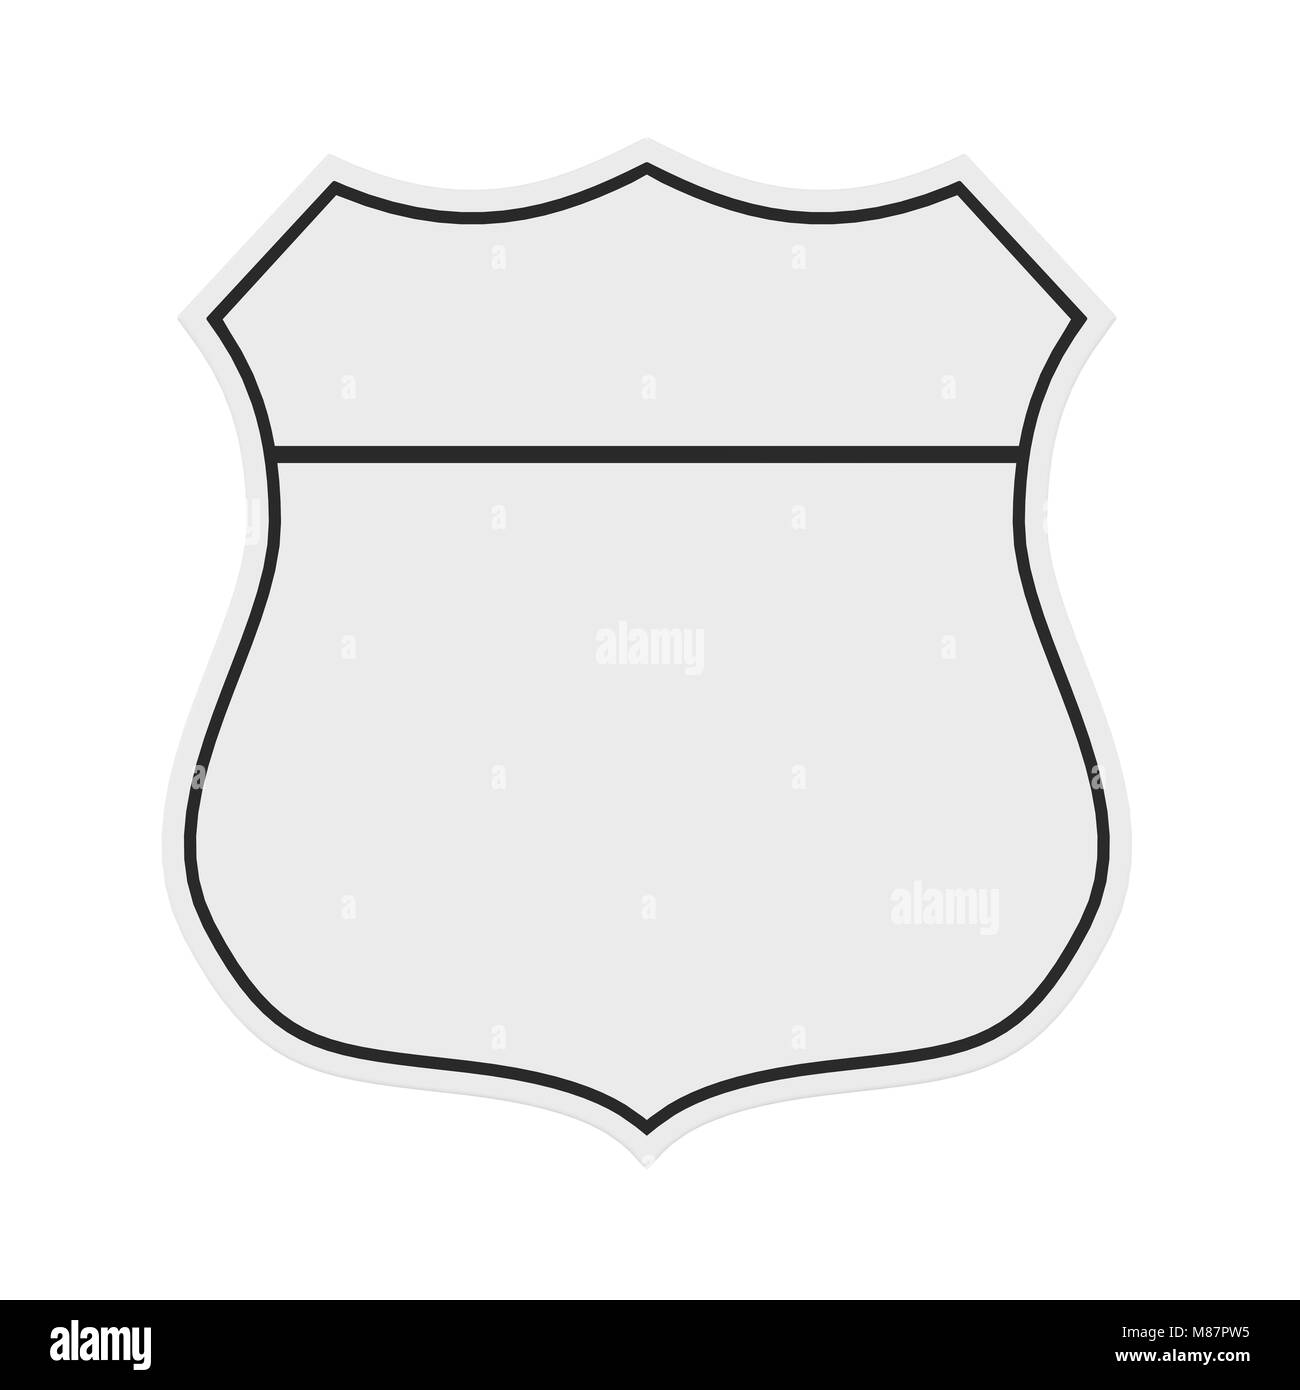 Blank Highway Route Shield Isolated Stock Photo